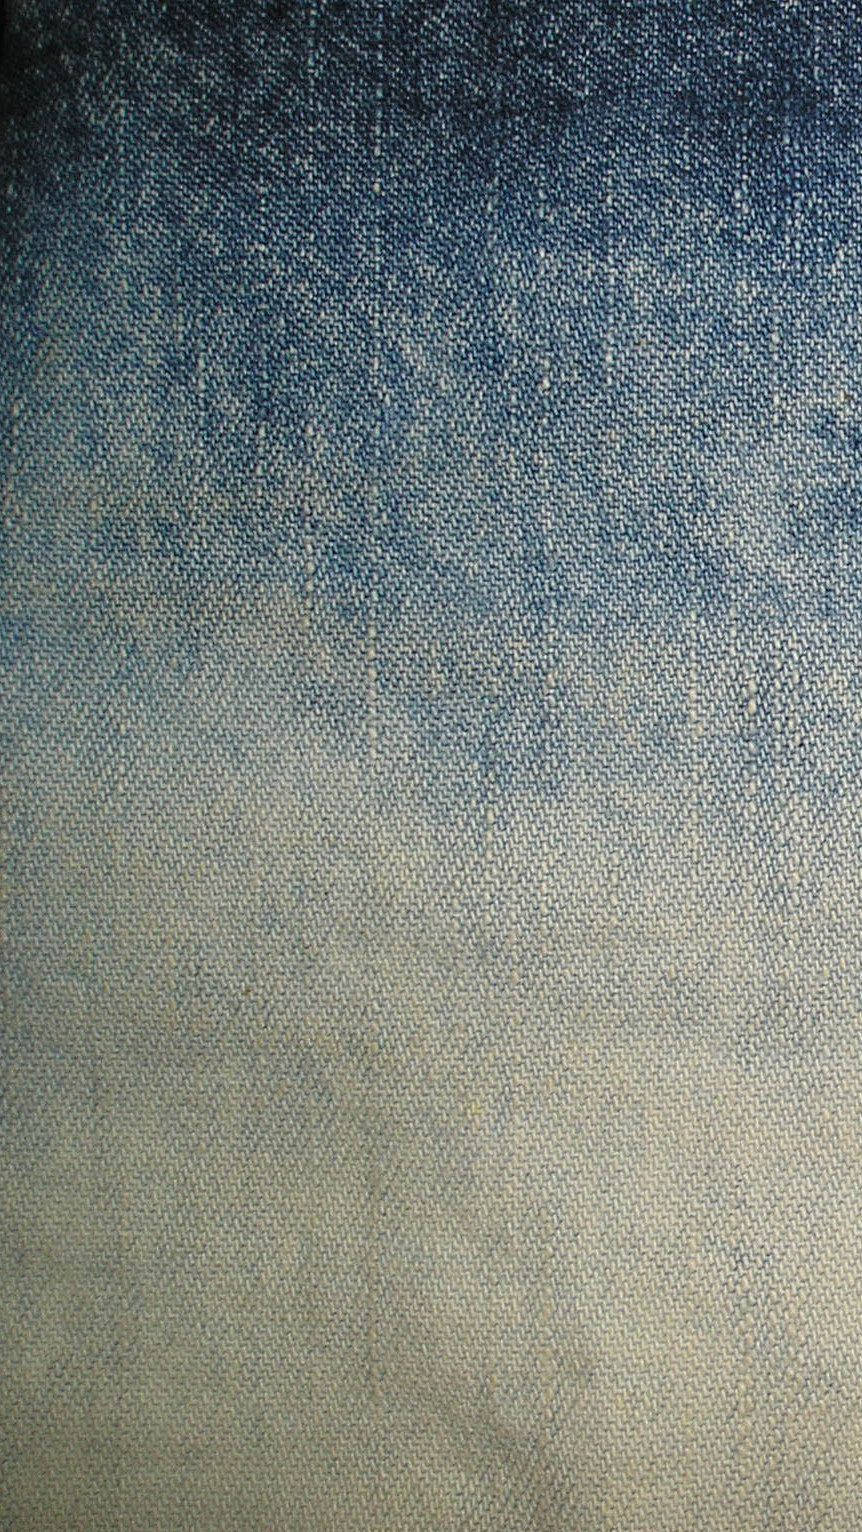 Denim Texture With Faded Area Wallpaper